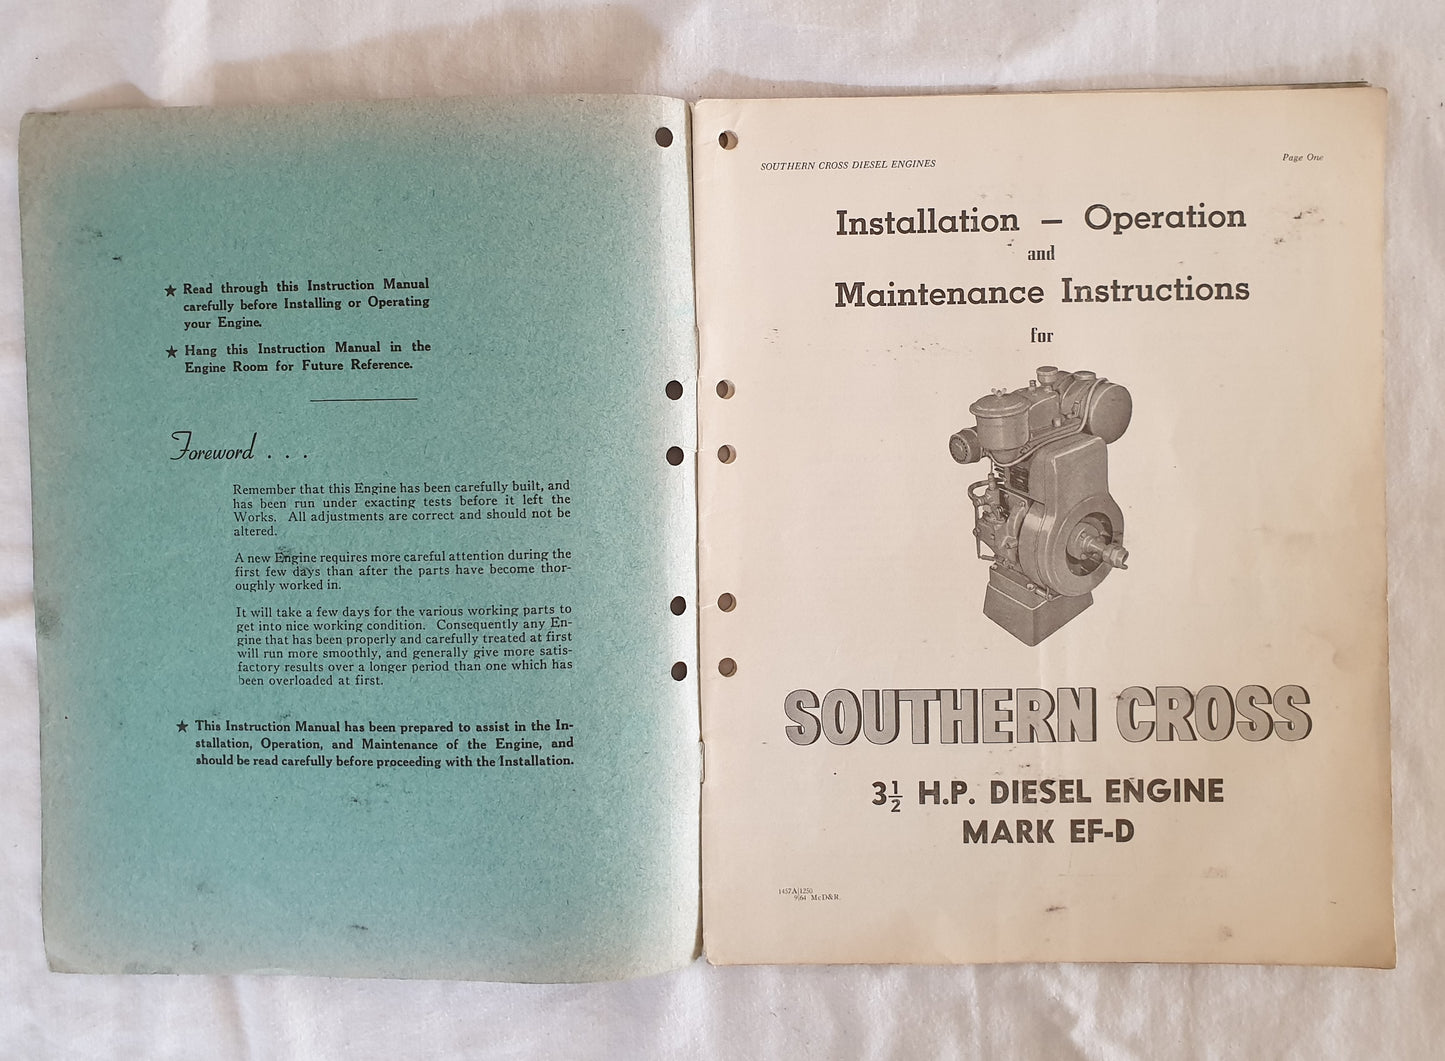 Instruction Manual for Southern Cross 3 1/2 h.p. Diesel Engine Mark EF-D